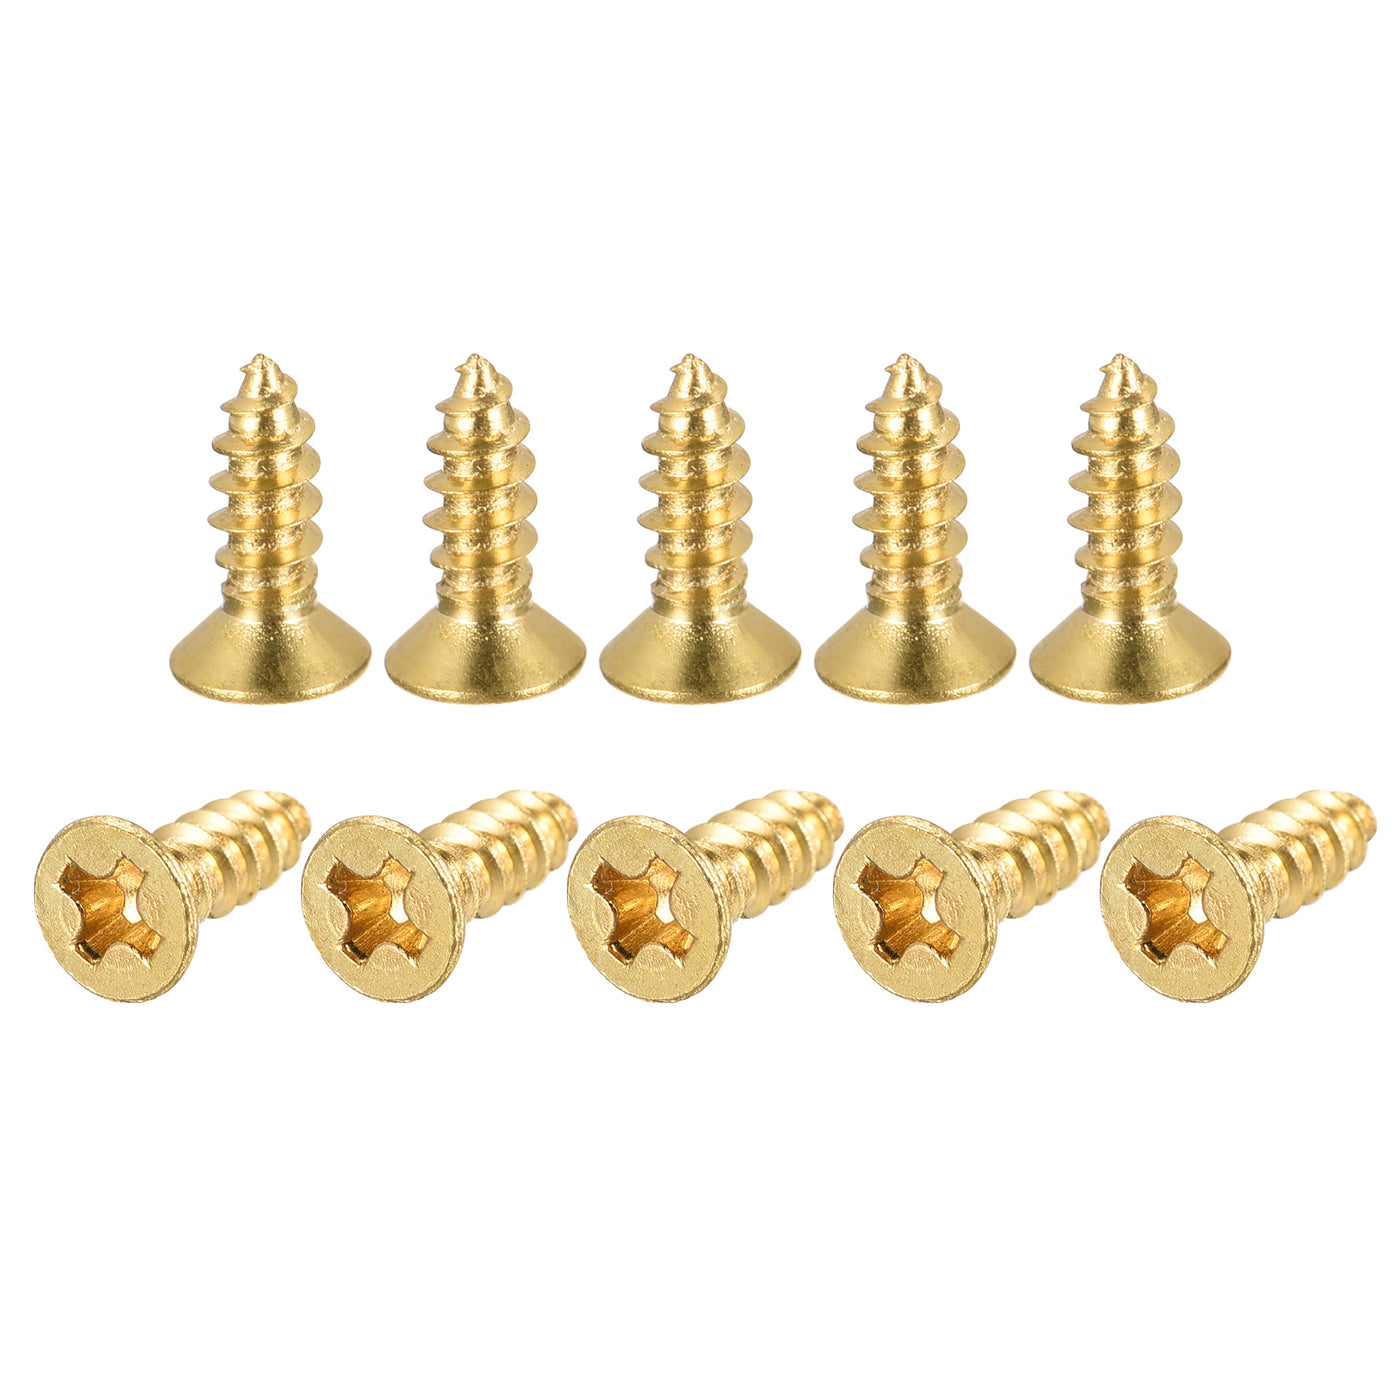 uxcell Uxcell Brass Wood Screws, M3.5x12mm Phillips Flat Head Self Tapping Connector for Door, Cabinet, Wooden Furniture 50Pcs